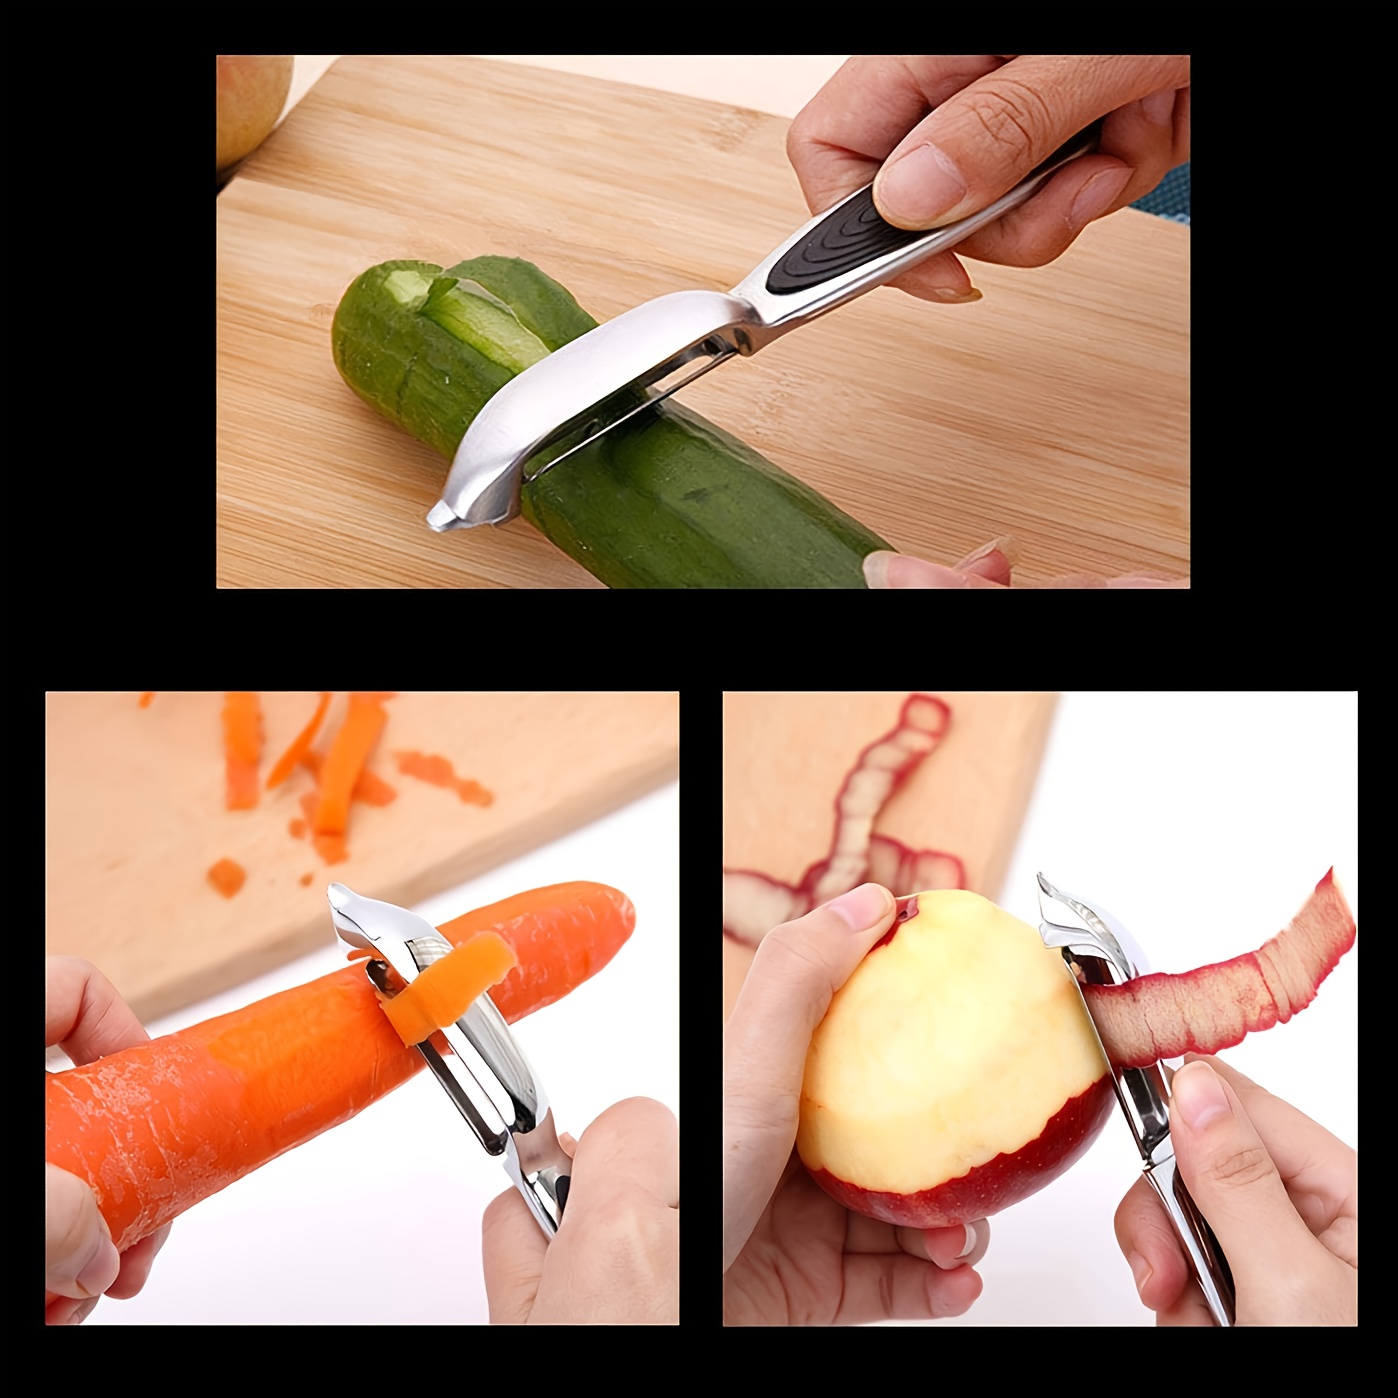 3pcs Vegetable Peeler Set With Comfortable Handle And Ultra-sharp Stainless  Steel Blades - Perfect Kitchen Peeler In Duck Shape For Veggies, Fruits,  Potatoes, Carrots, Apples